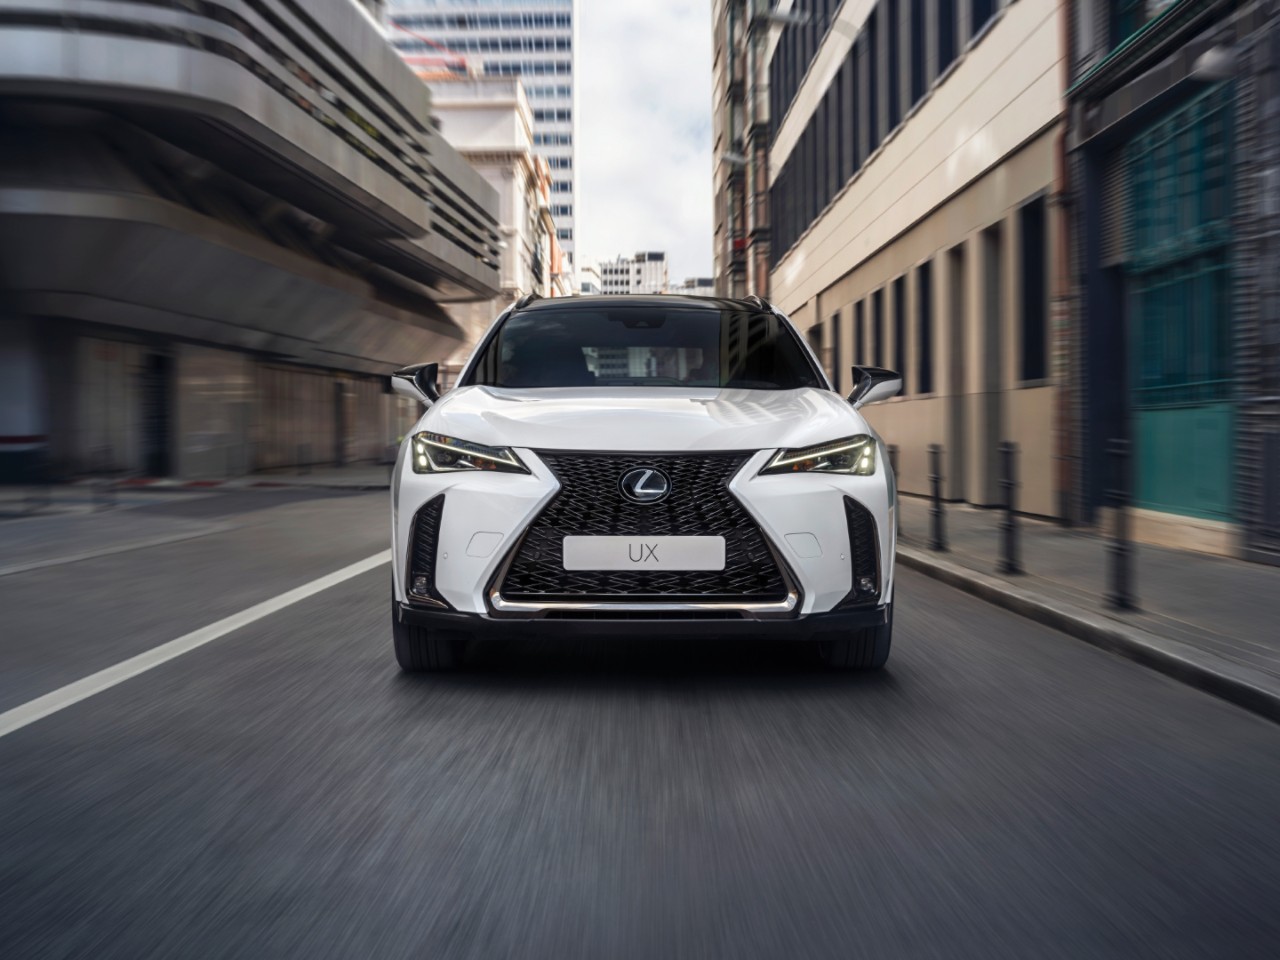 Front view of the Lexus UX driving 